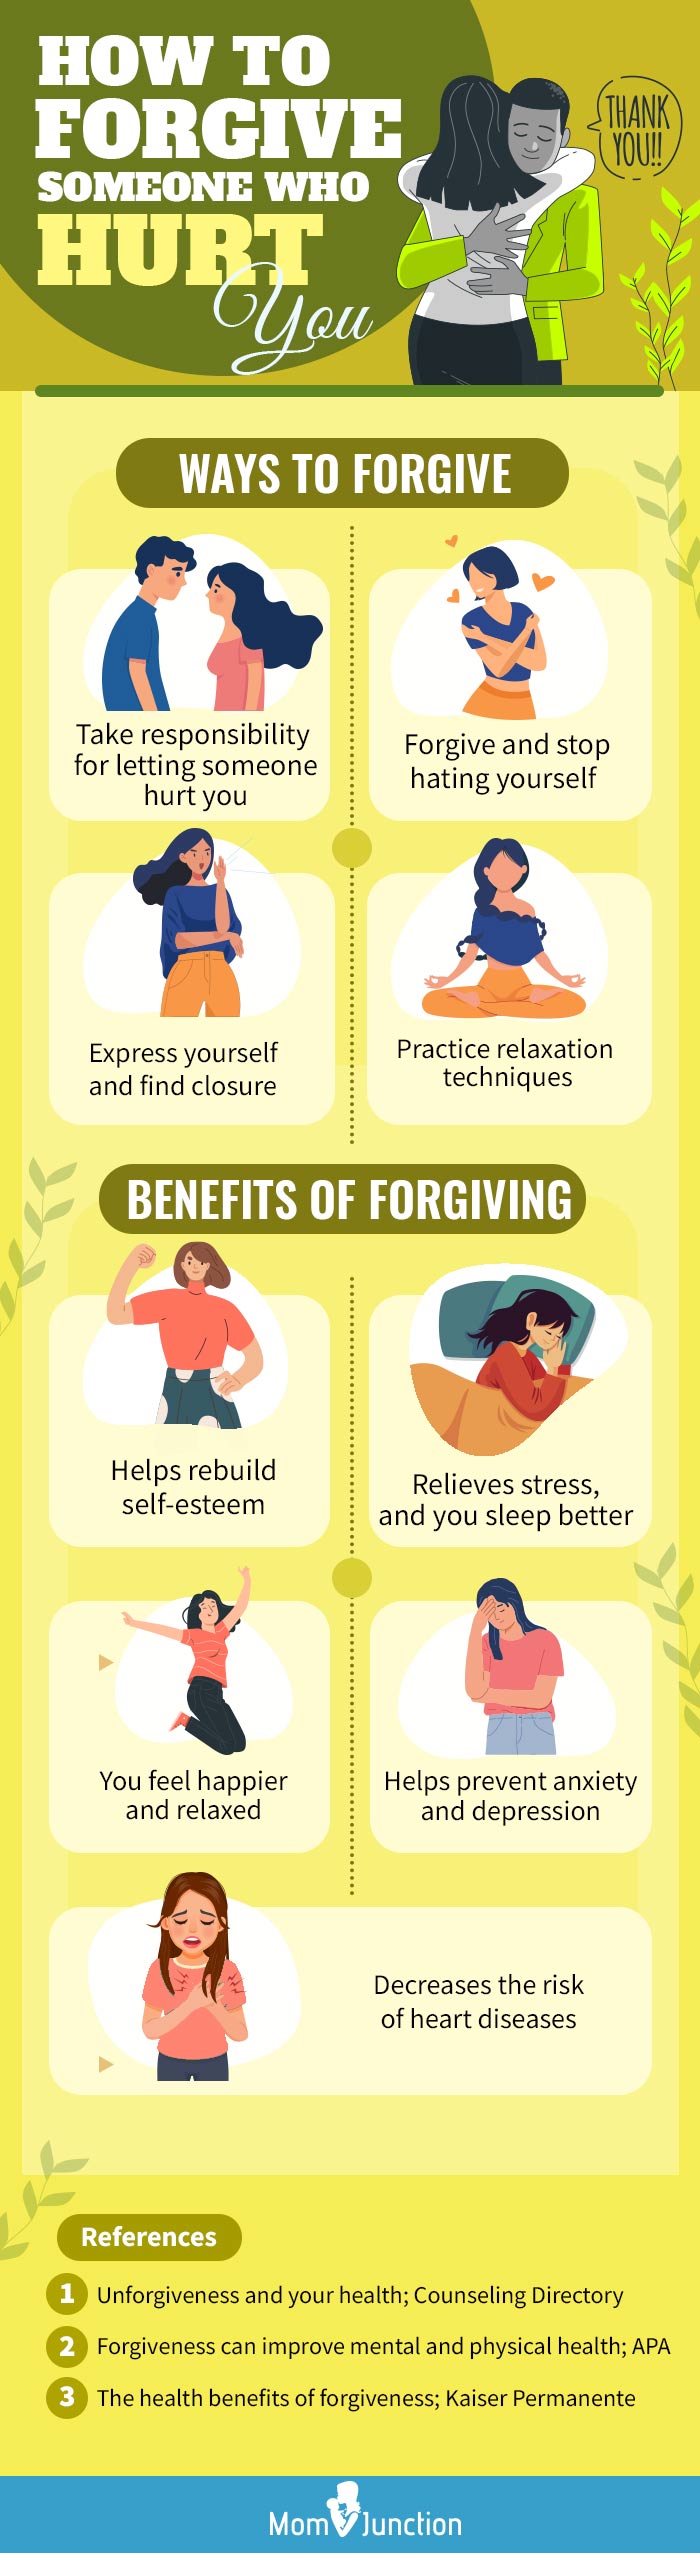 how to forgive someone who hurt you [infographic]